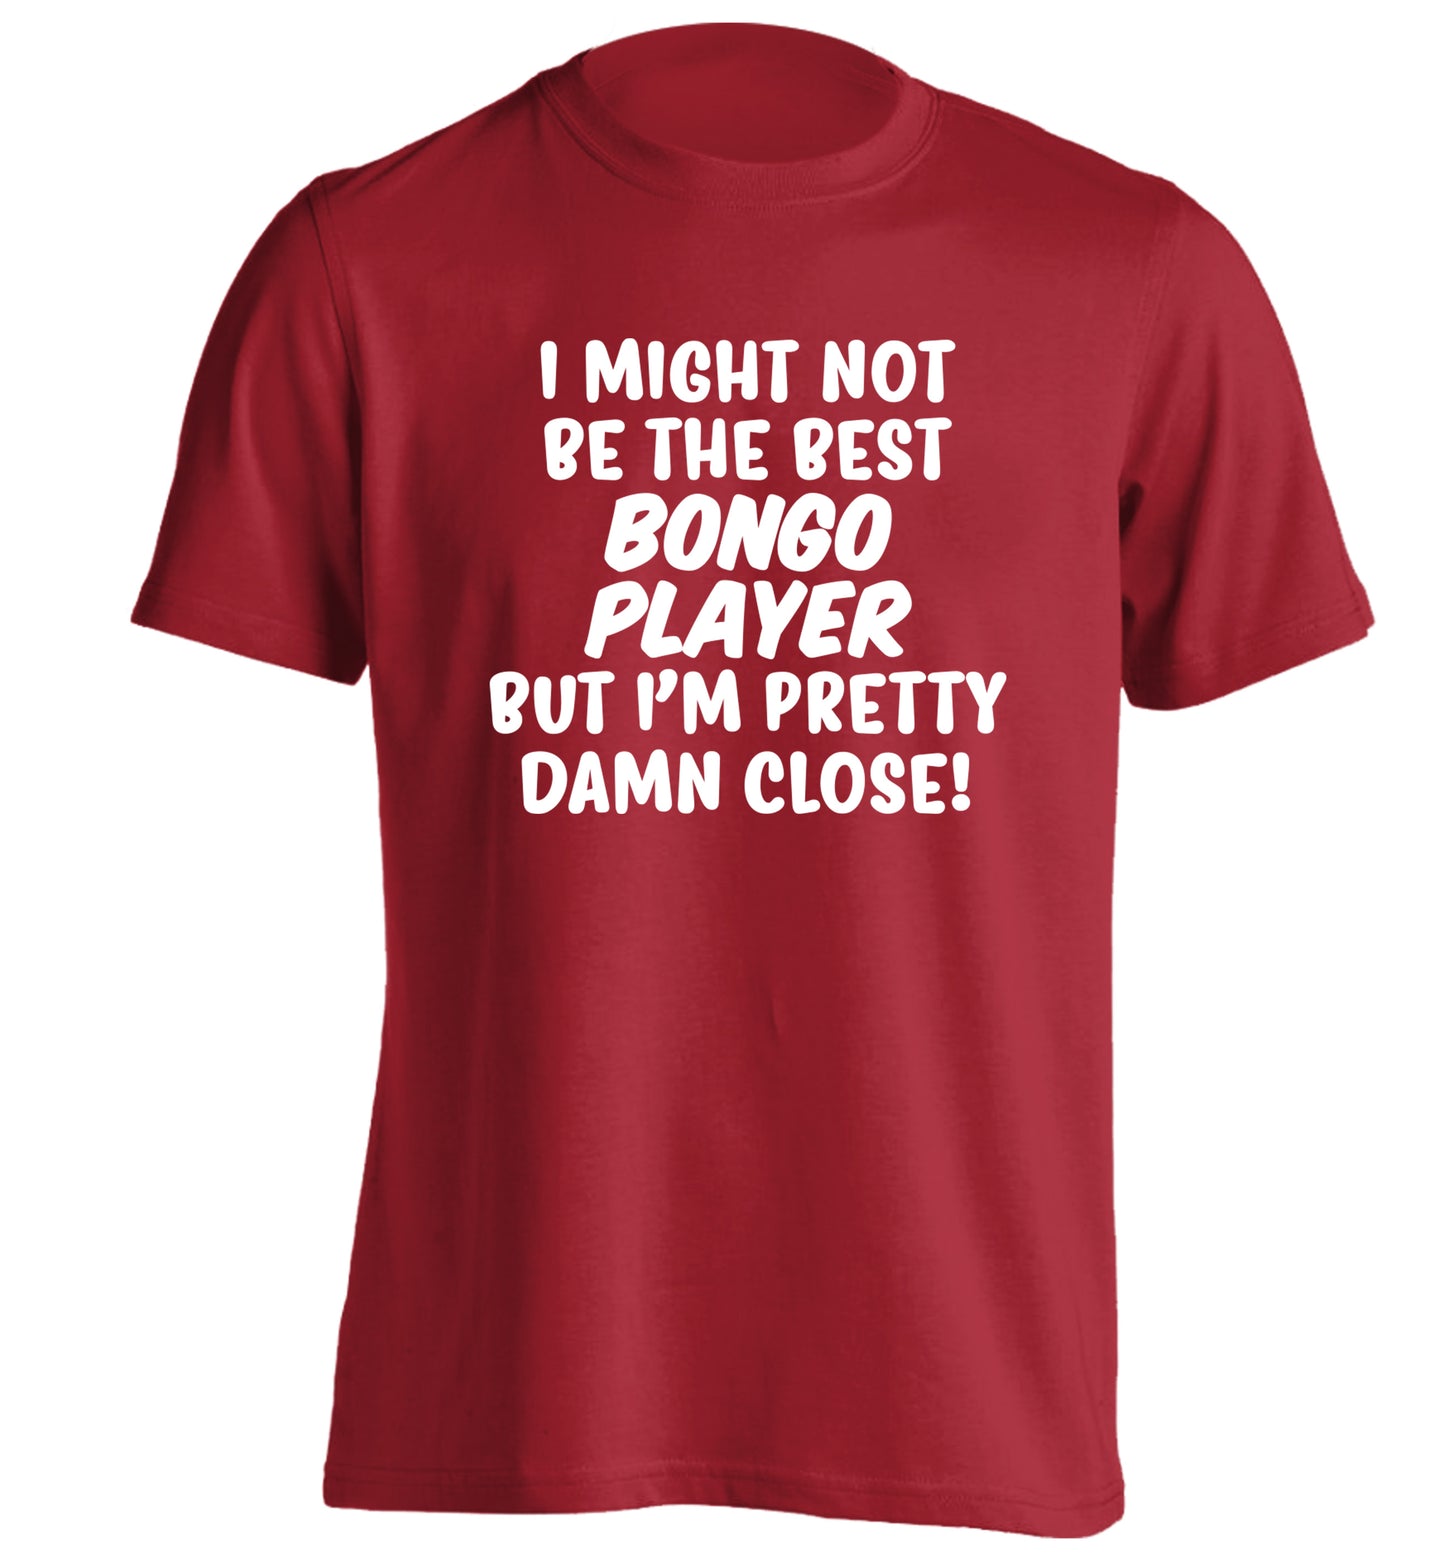 I might not be the best bongo player but I'm pretty close! adults unisexred Tshirt 2XL